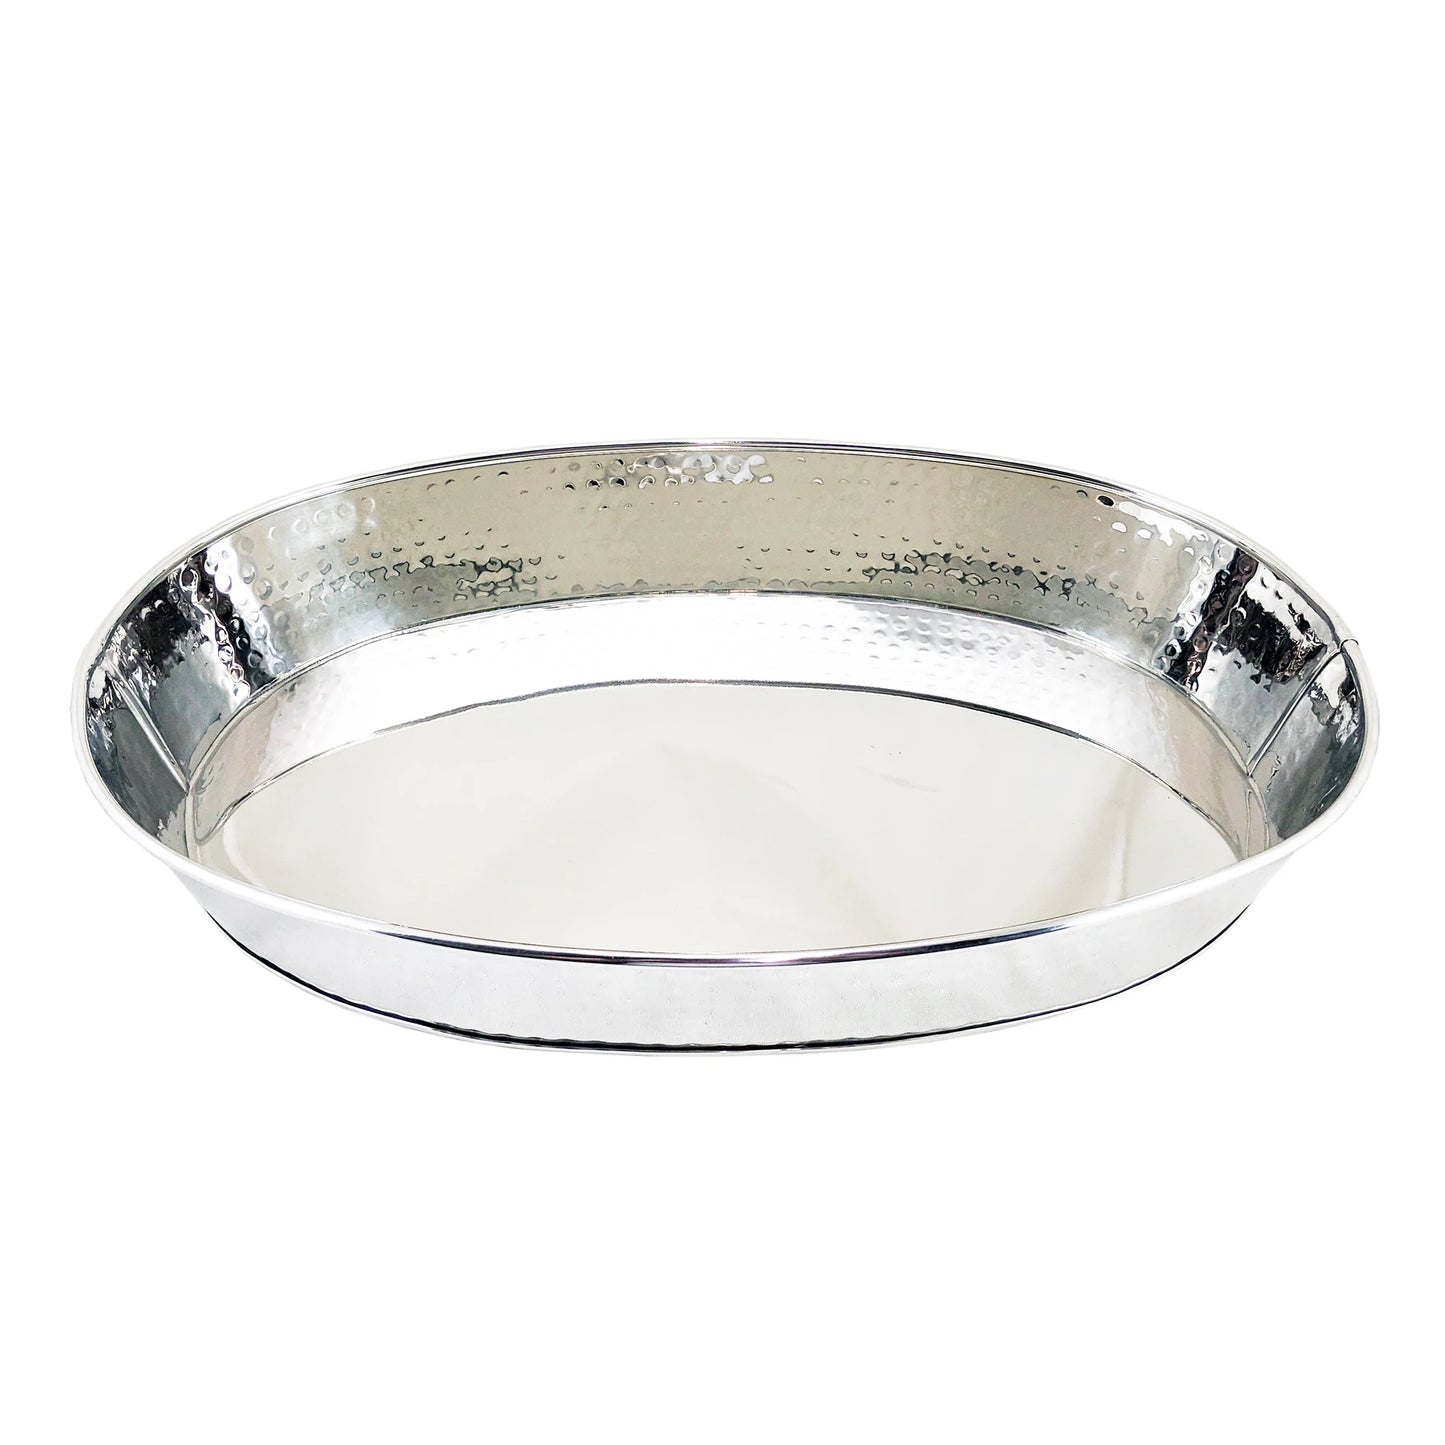 Serving tray for parties made of stainless steel with extra durable hammered exterior.  Use to serve food, snacks, and drinks at a wedding, anniversary, or birthday party.